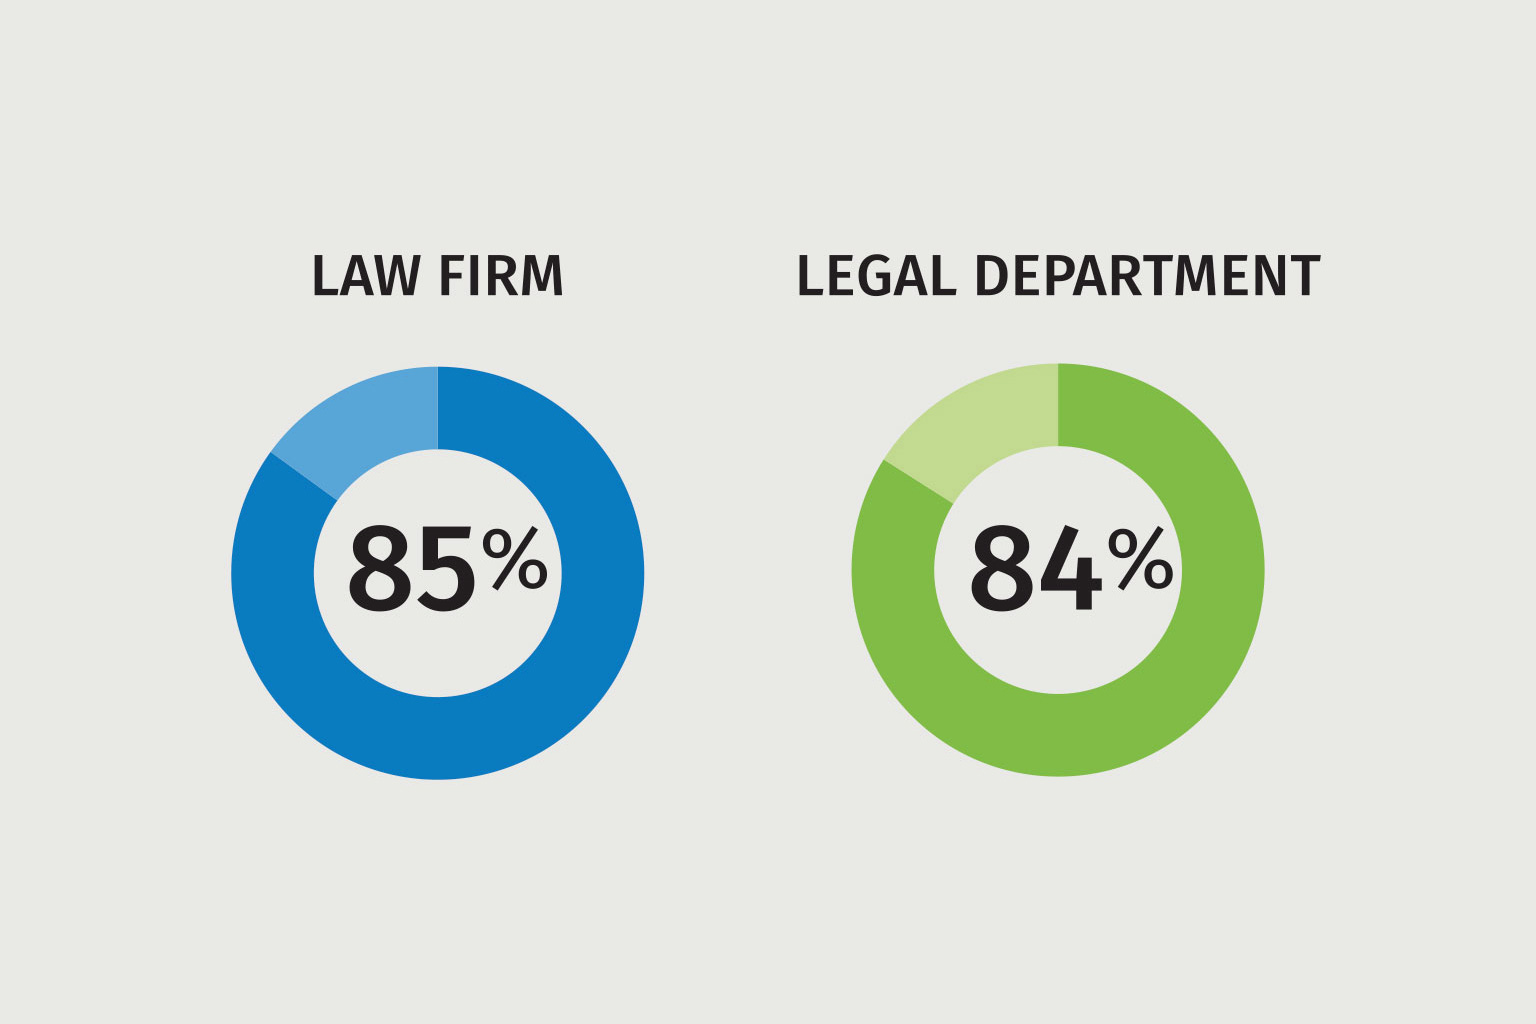 Lawyers from both groups expect to make greater use of technology to improve productivity